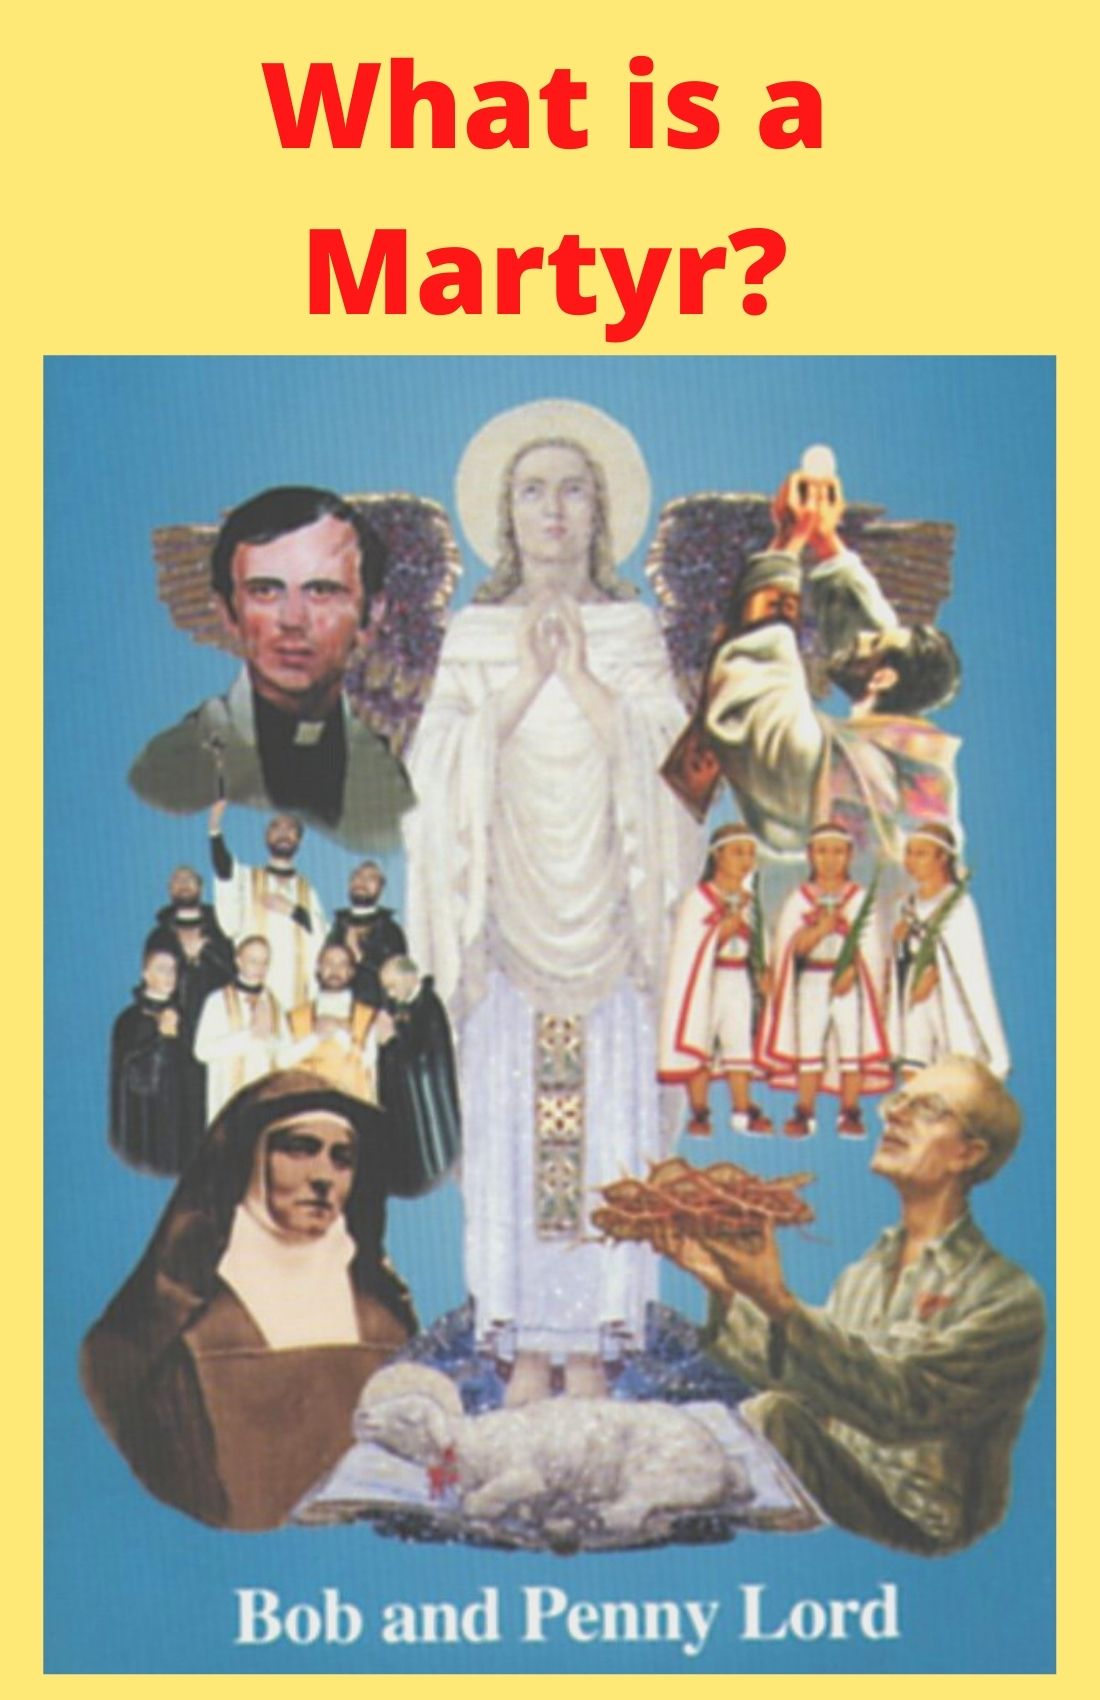 What is a Martyr? DVD - Bob and Penny Lord